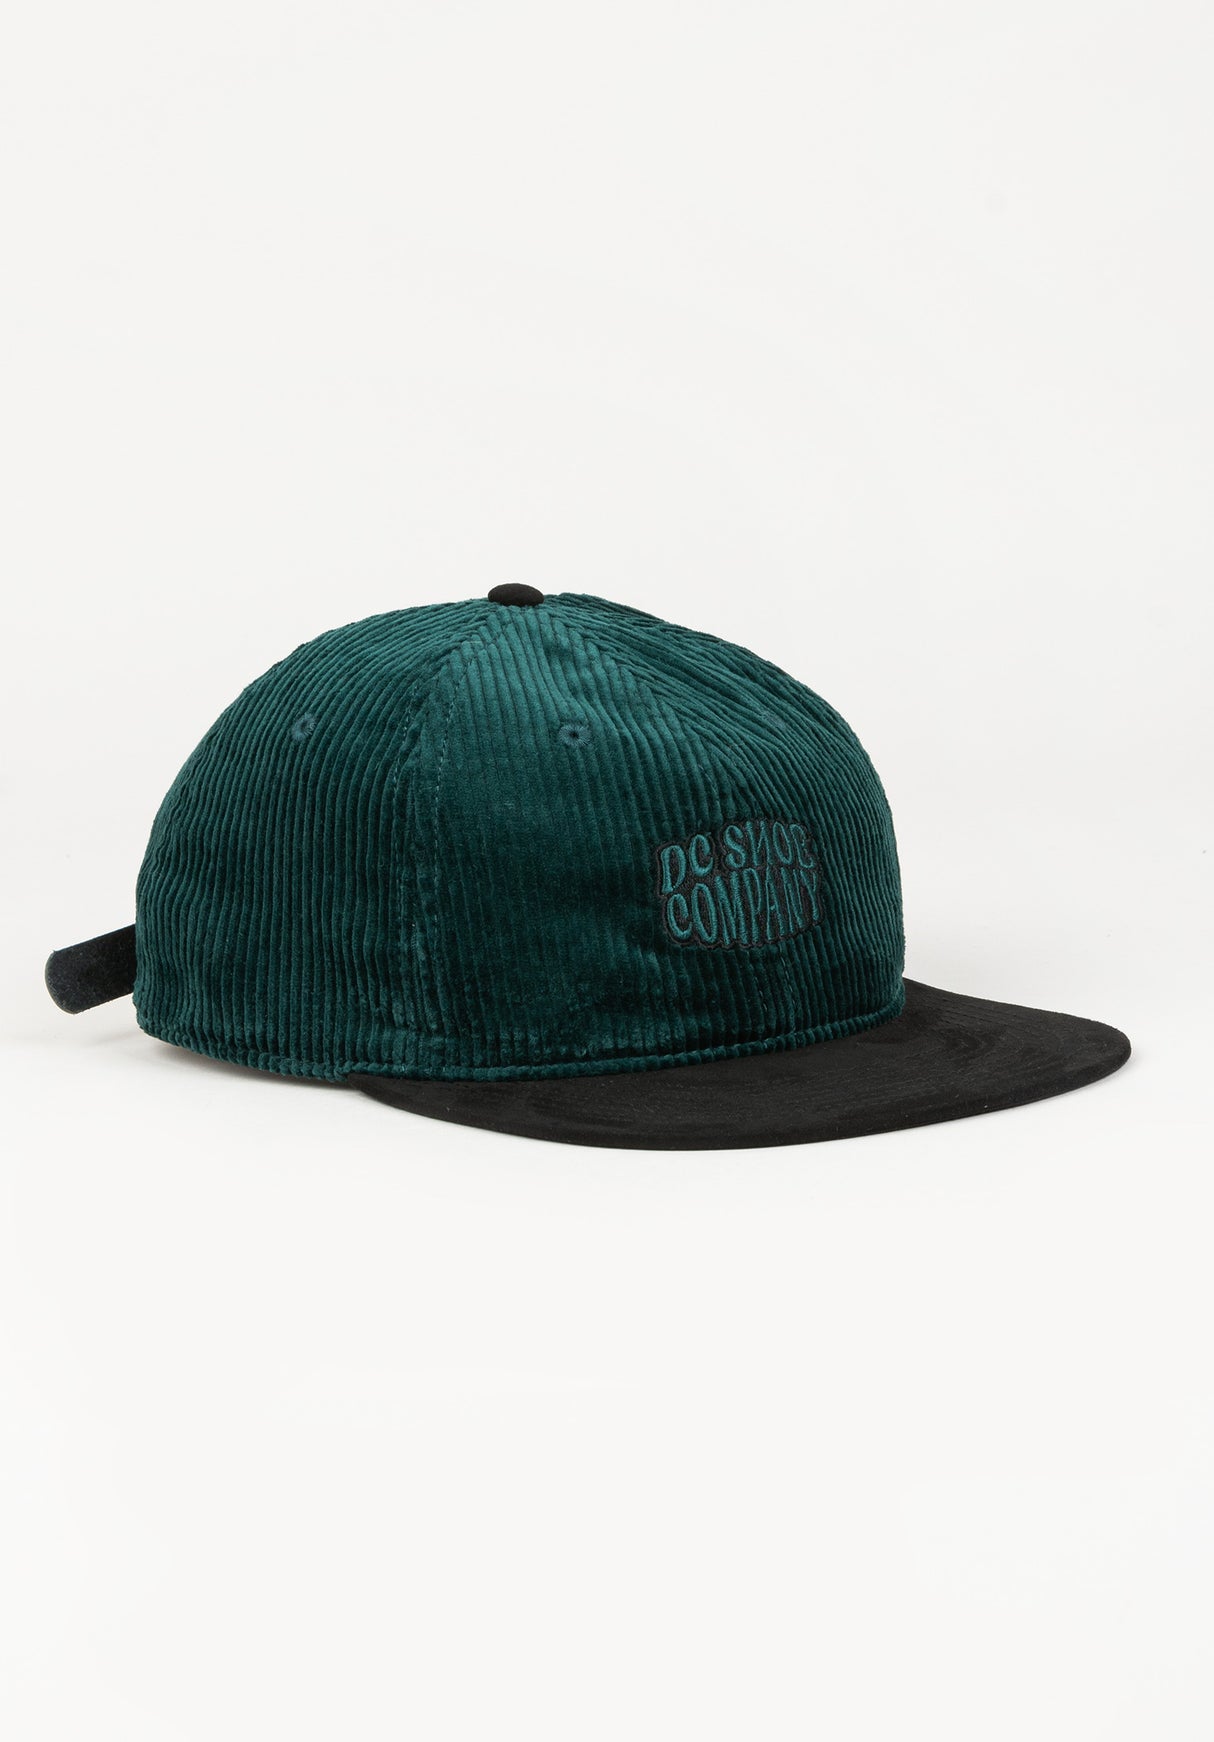 Cypher Strapback DC Shoes Cap in sycamore for Men – TITUS